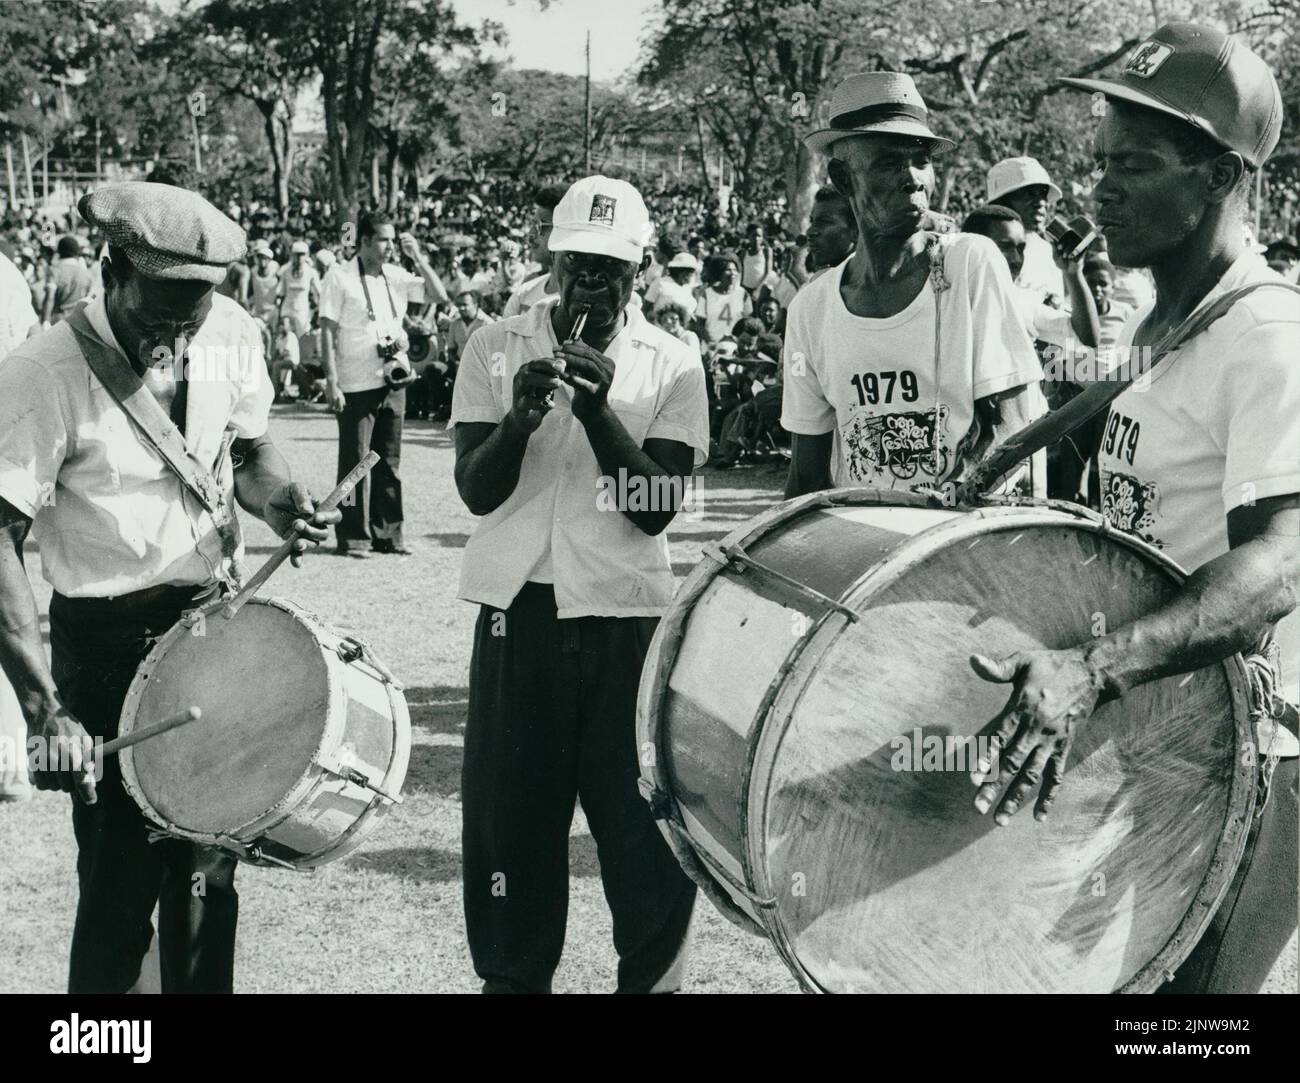 Black and white photograph of a Bajan band playing traditional folk music at a parade in Barbados, with a large crowd in the background Stock Photo